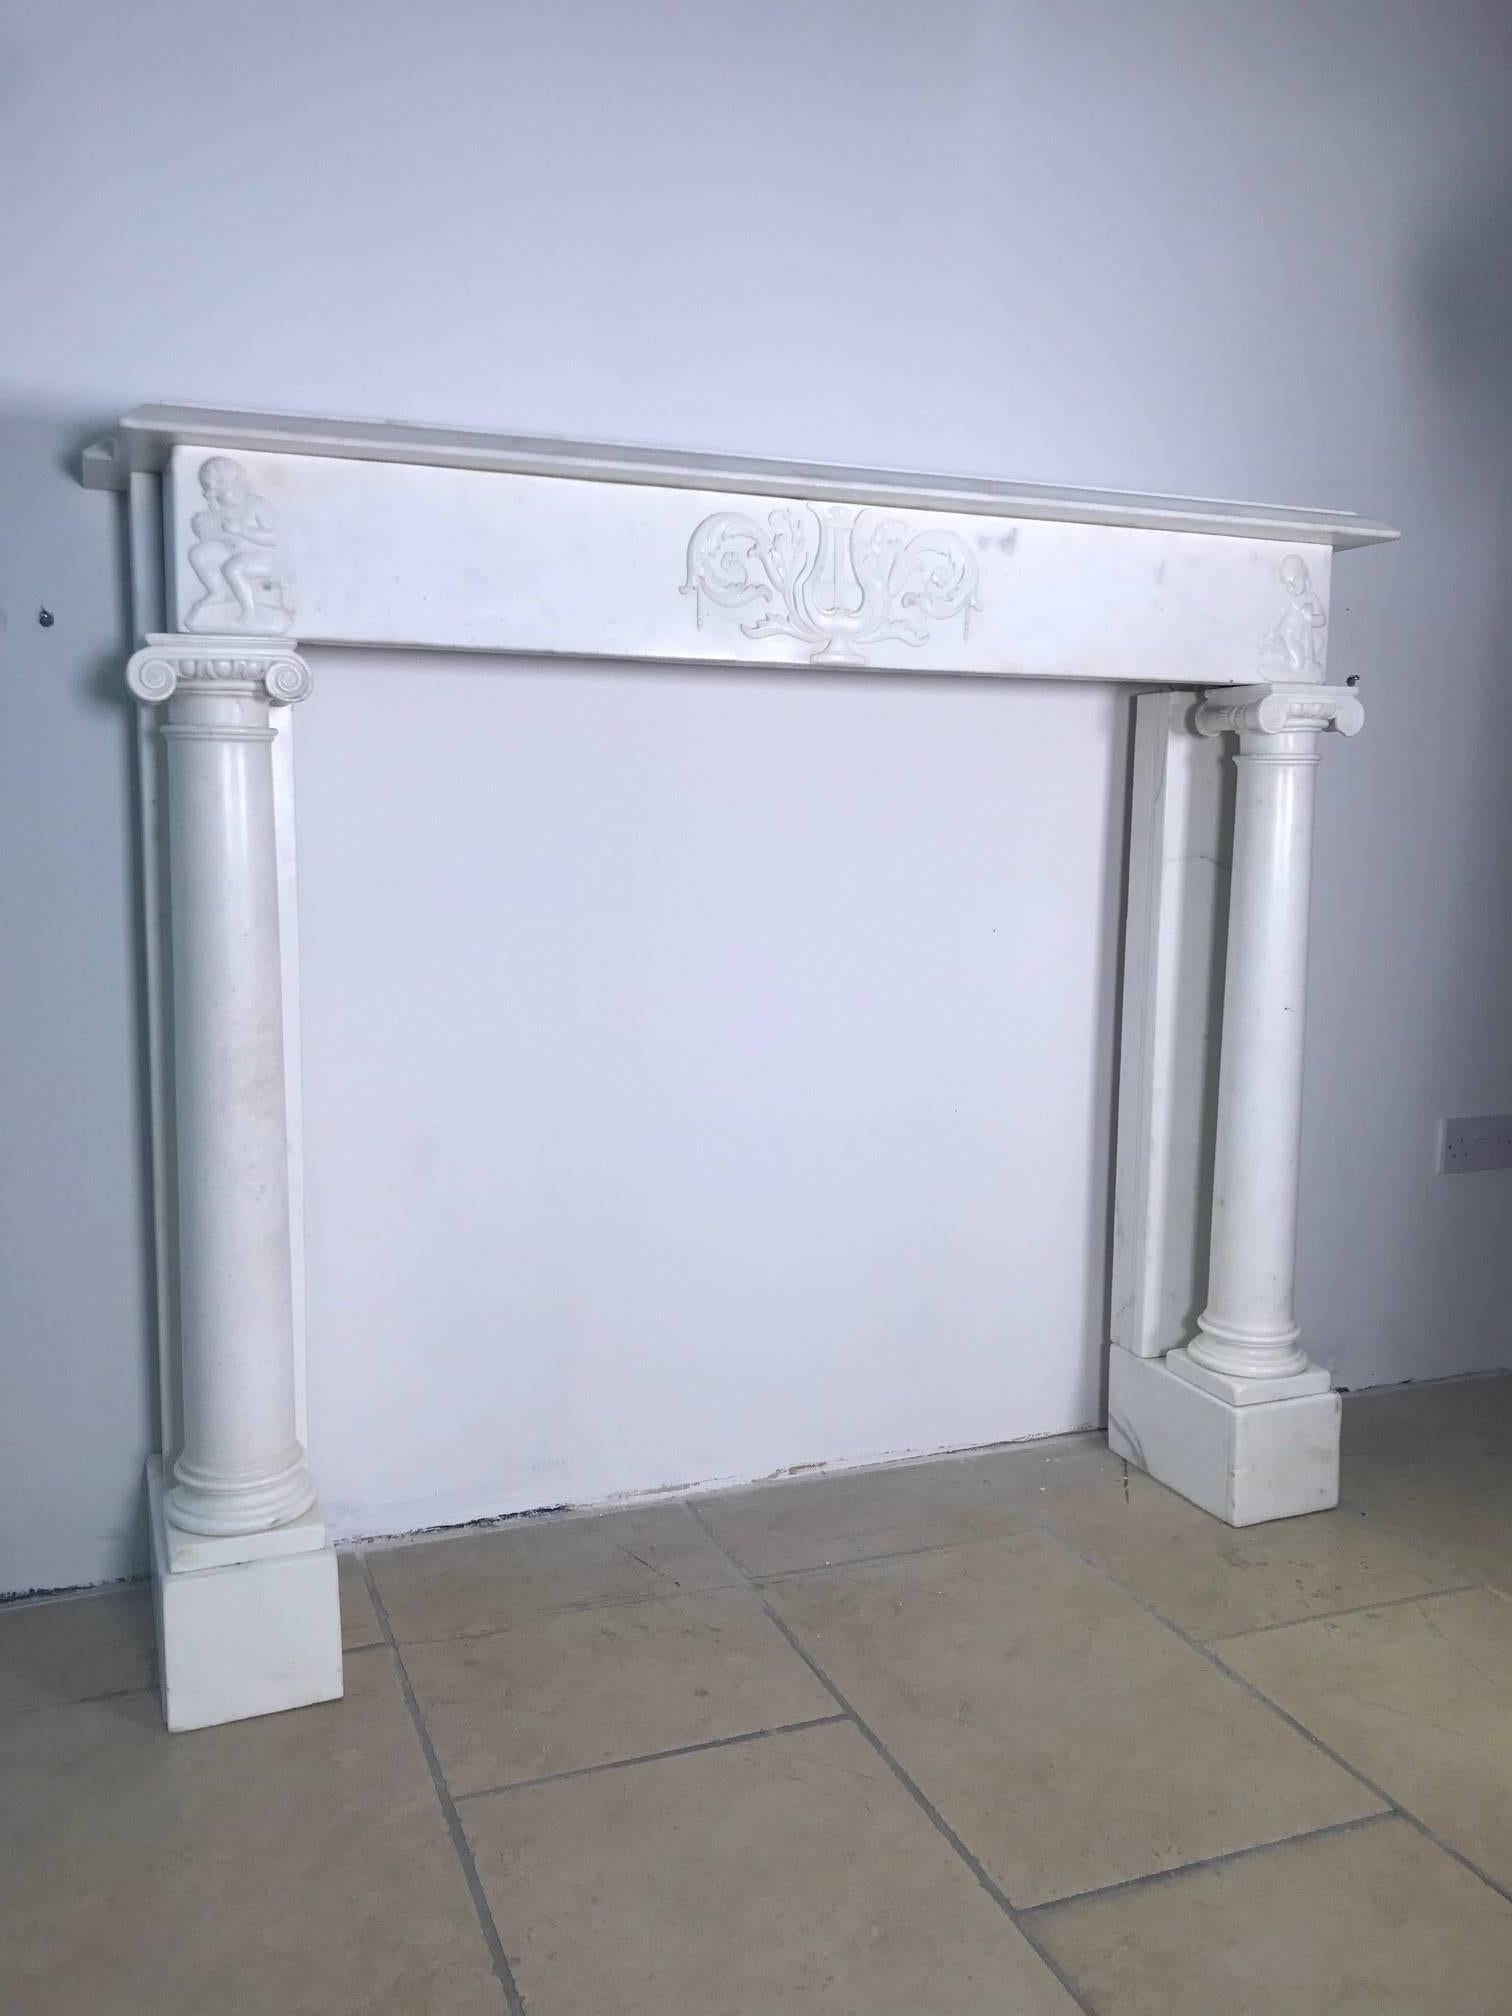 A very rare Georgian white statuary marble mantelpiece,
circa 1810-1830. This untouched and important fireplace was salvaged from a
London Mayfair town house.
This musically influenced chimney-piece is delicately hand carved, with its frieze